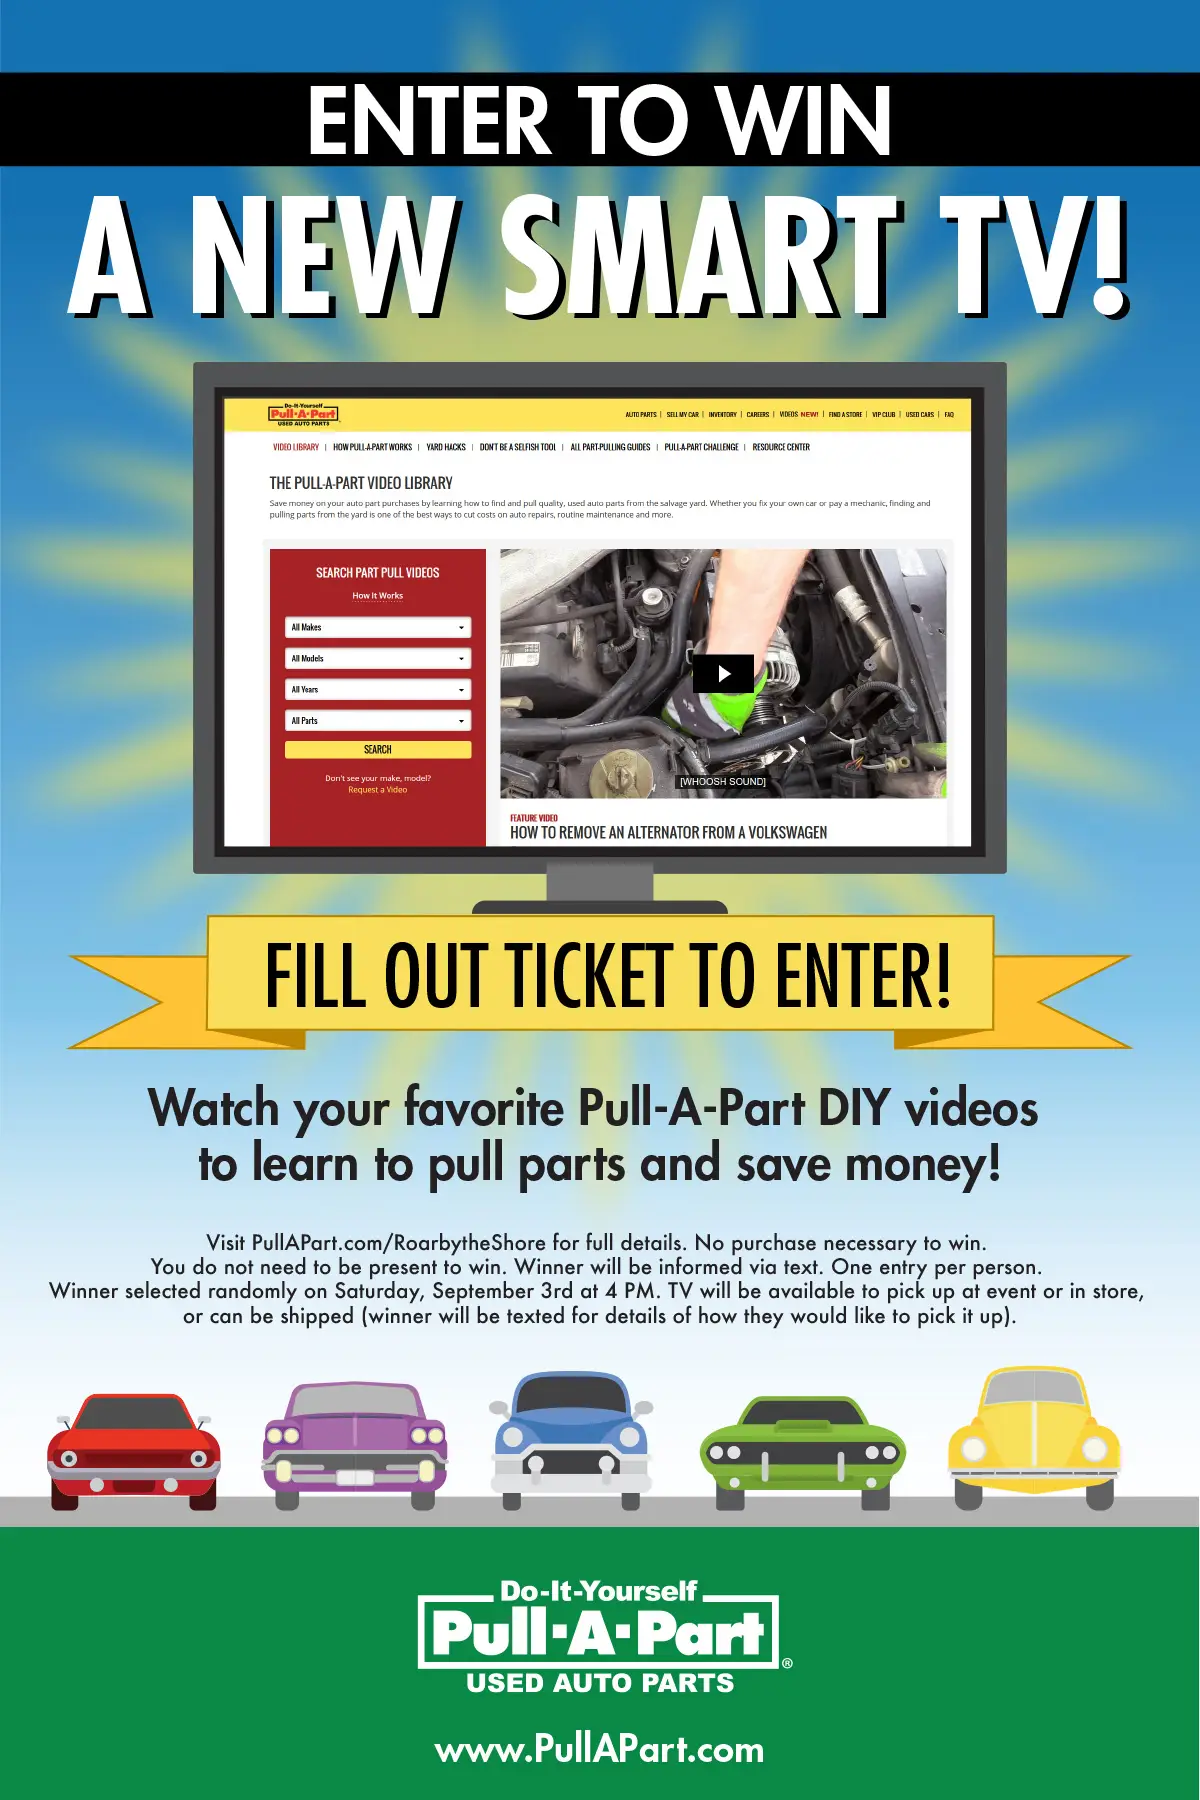 Win a Smart TV courtesy of Pull-A-Part